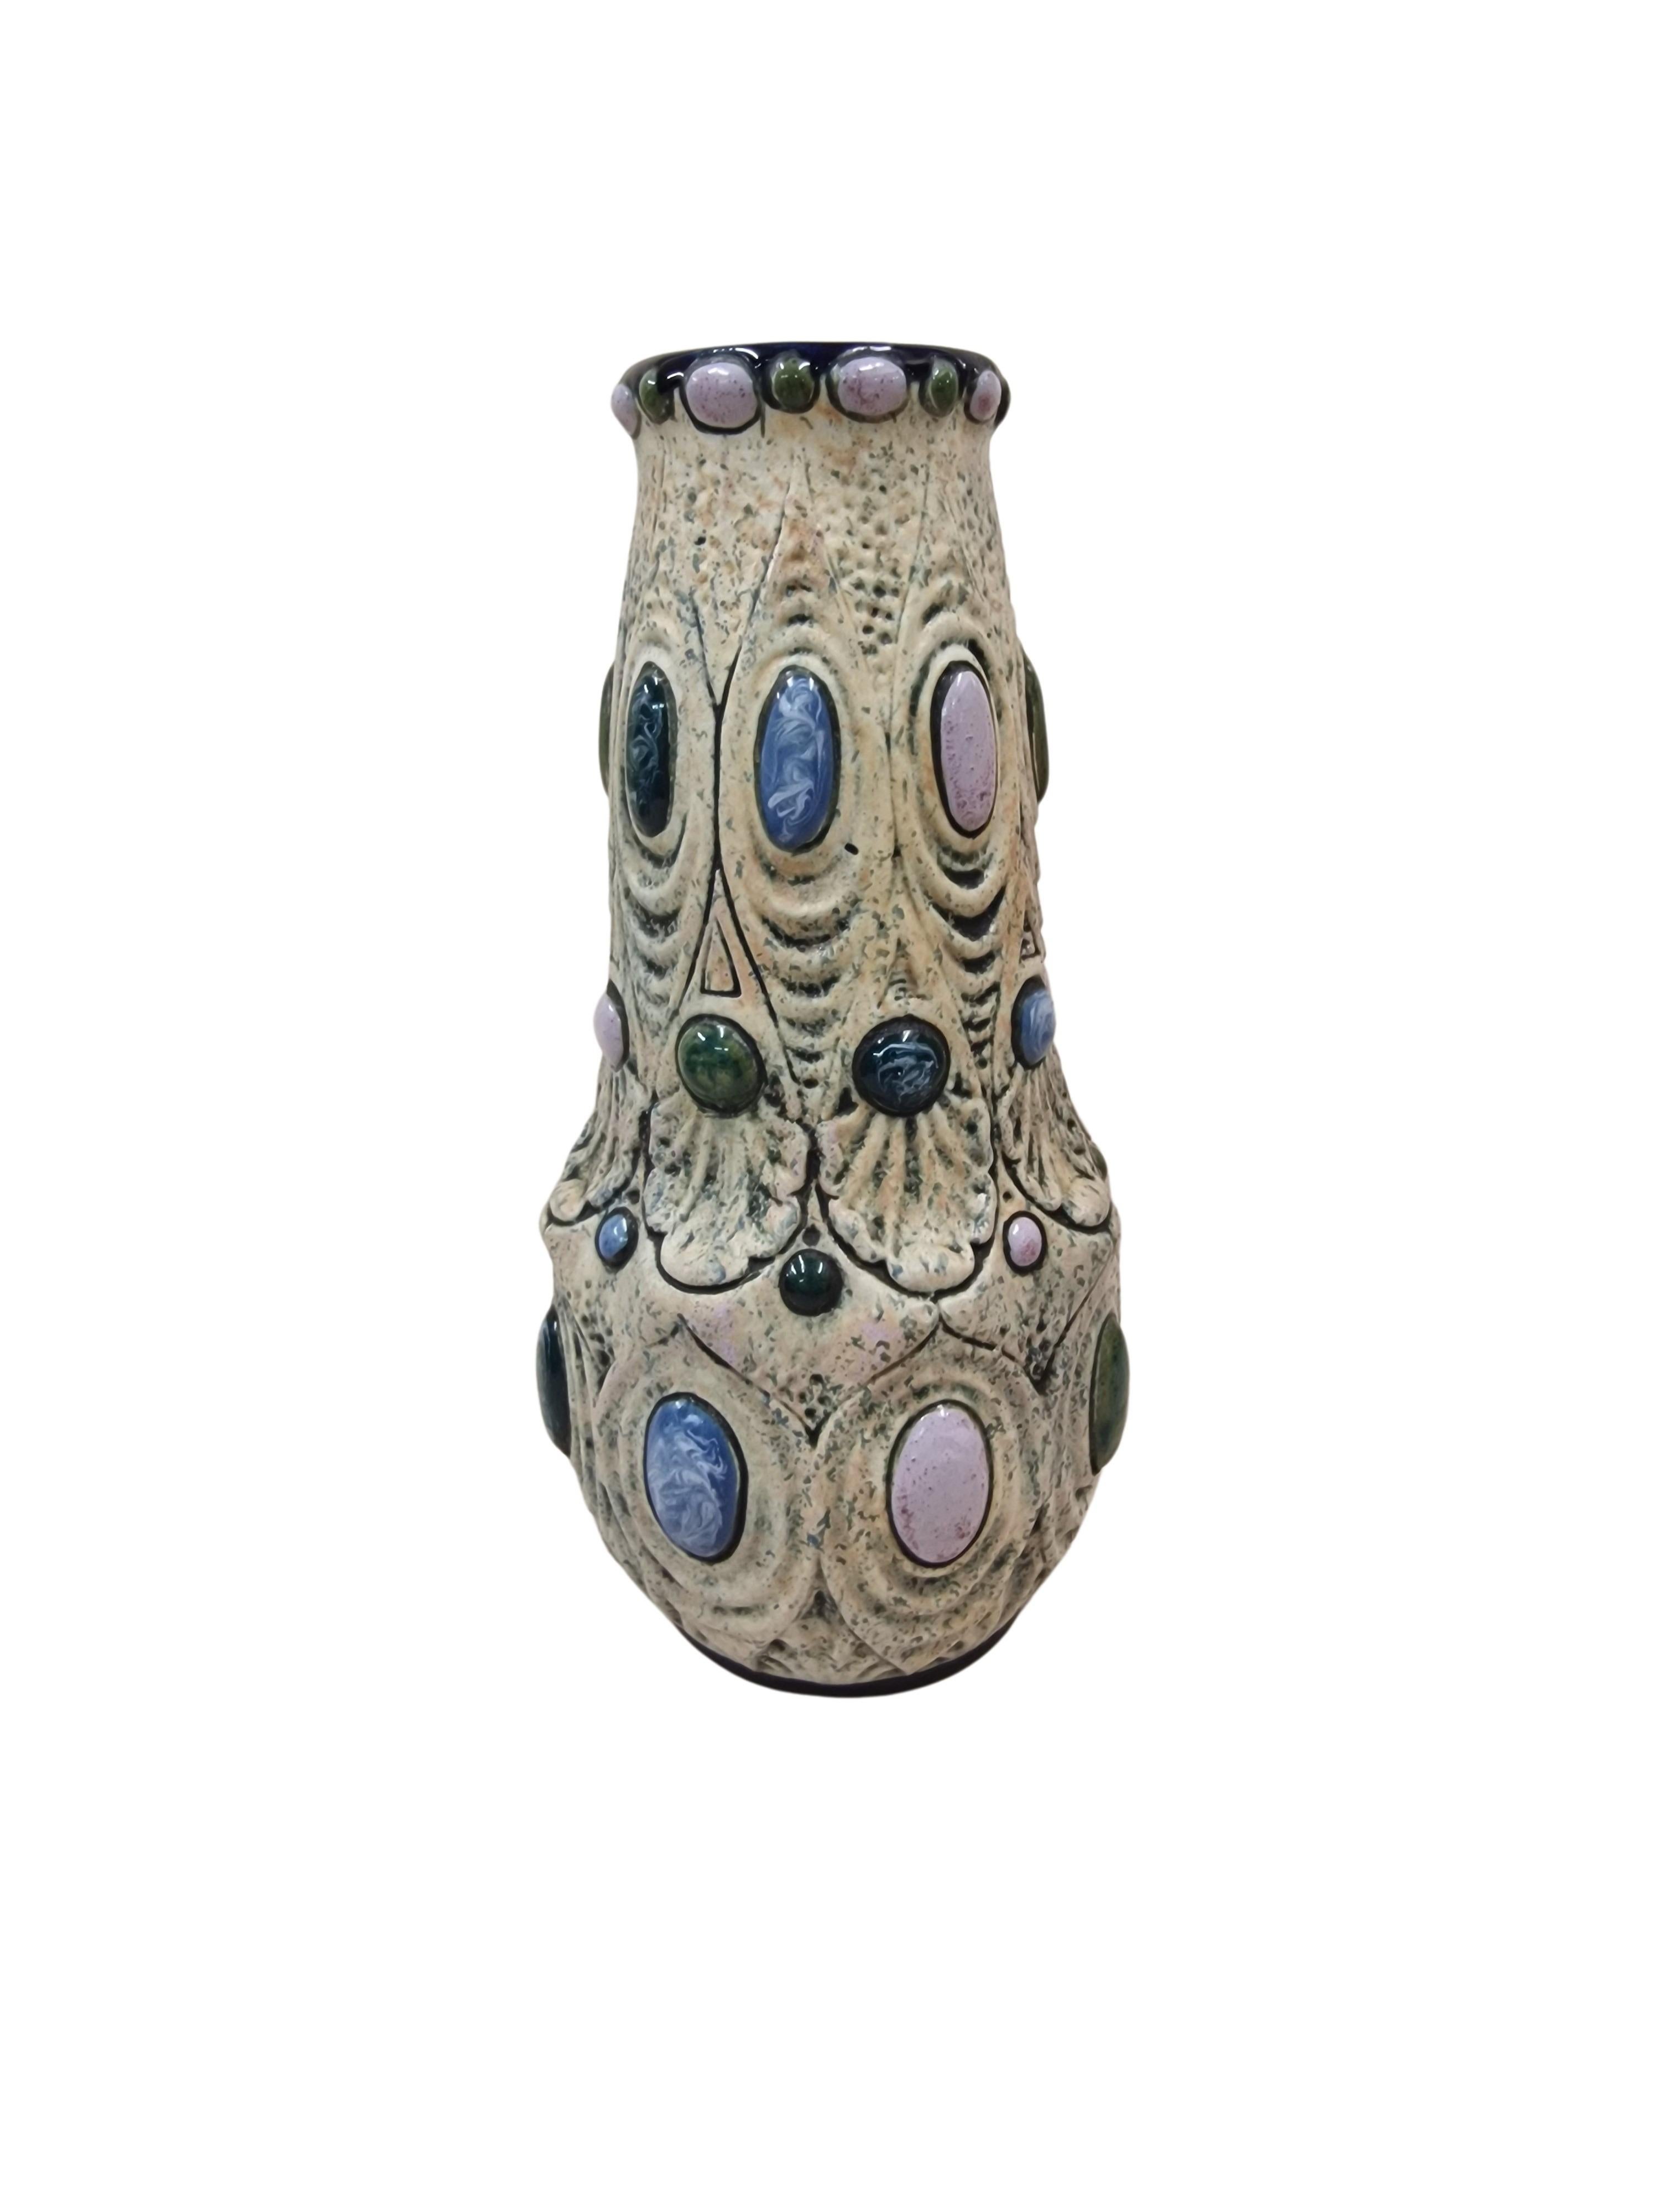 This magnificant flower vase is from the well-known Austrian-Czech manufacturer Amphora, made around 1920.

The vase has a classic shape, a round base and round opening. The light base color is structured by light waves that are interrupted by round